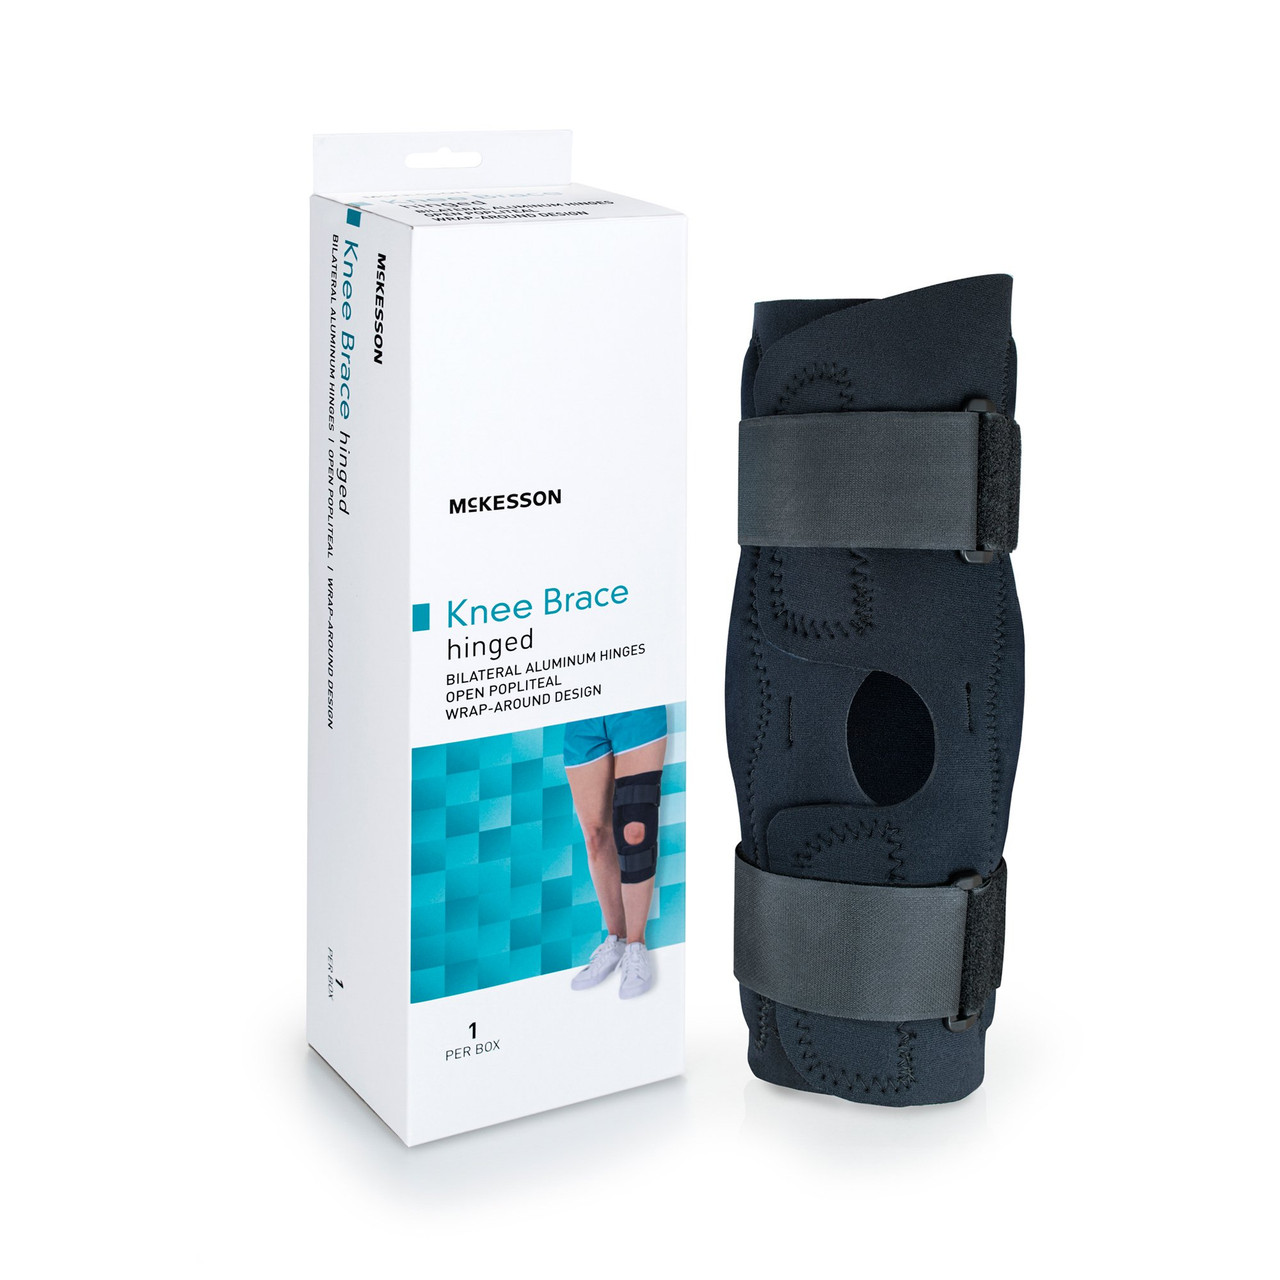 Breg - T Scope Premier Post-Op Knee Brace One Size Fits All: Left Or Right